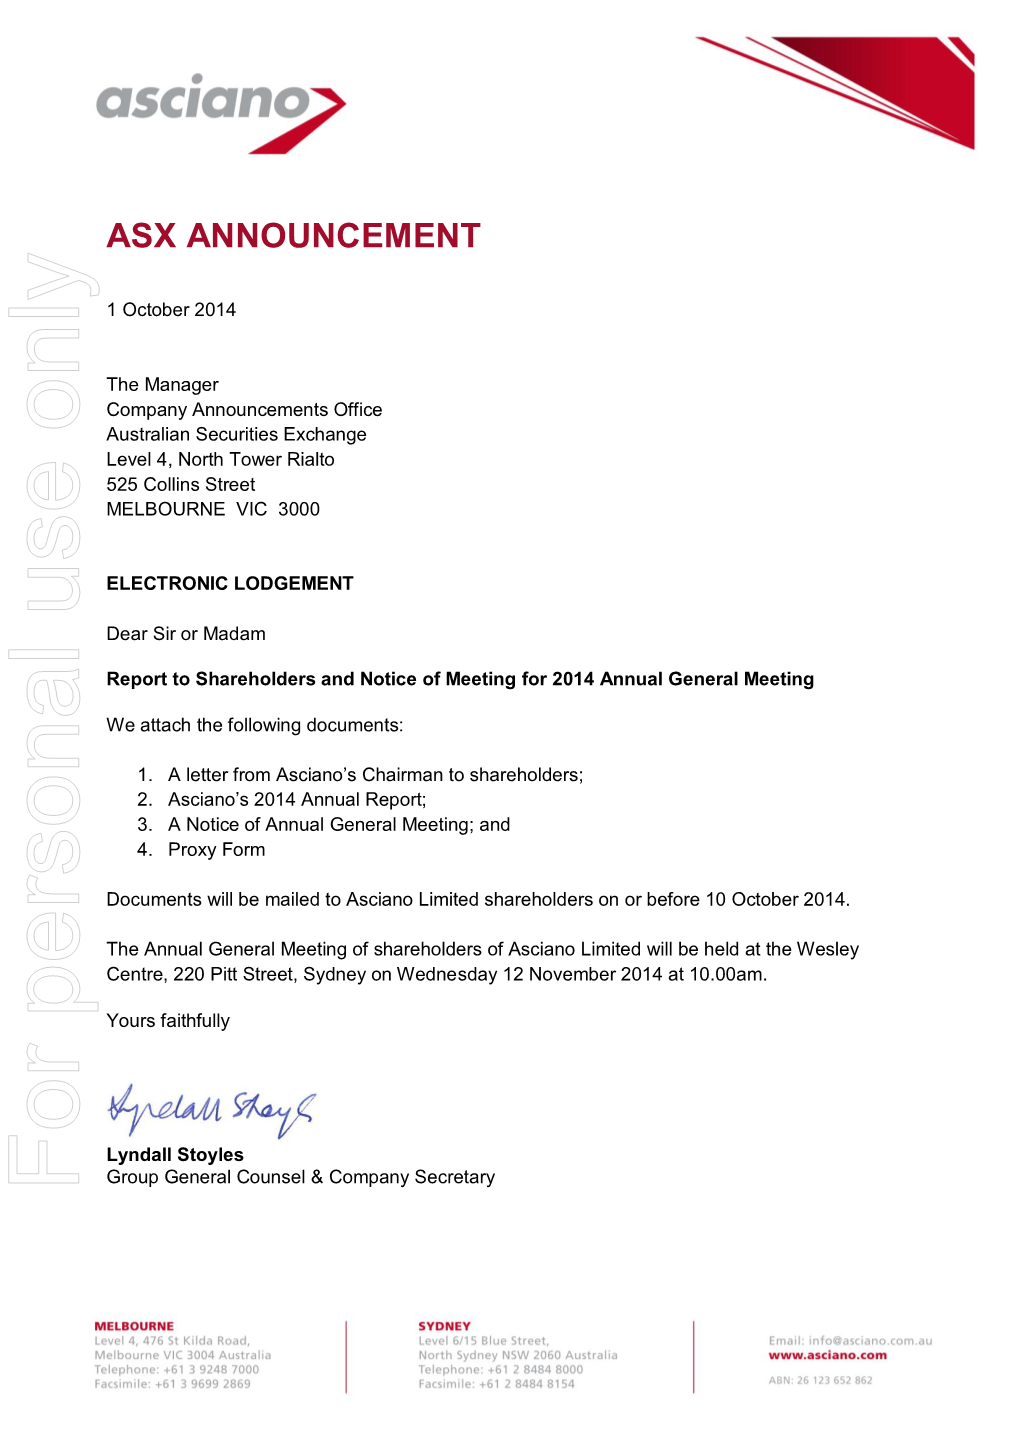 Asciano Limited Shareholders on Or Before 10 October 2014